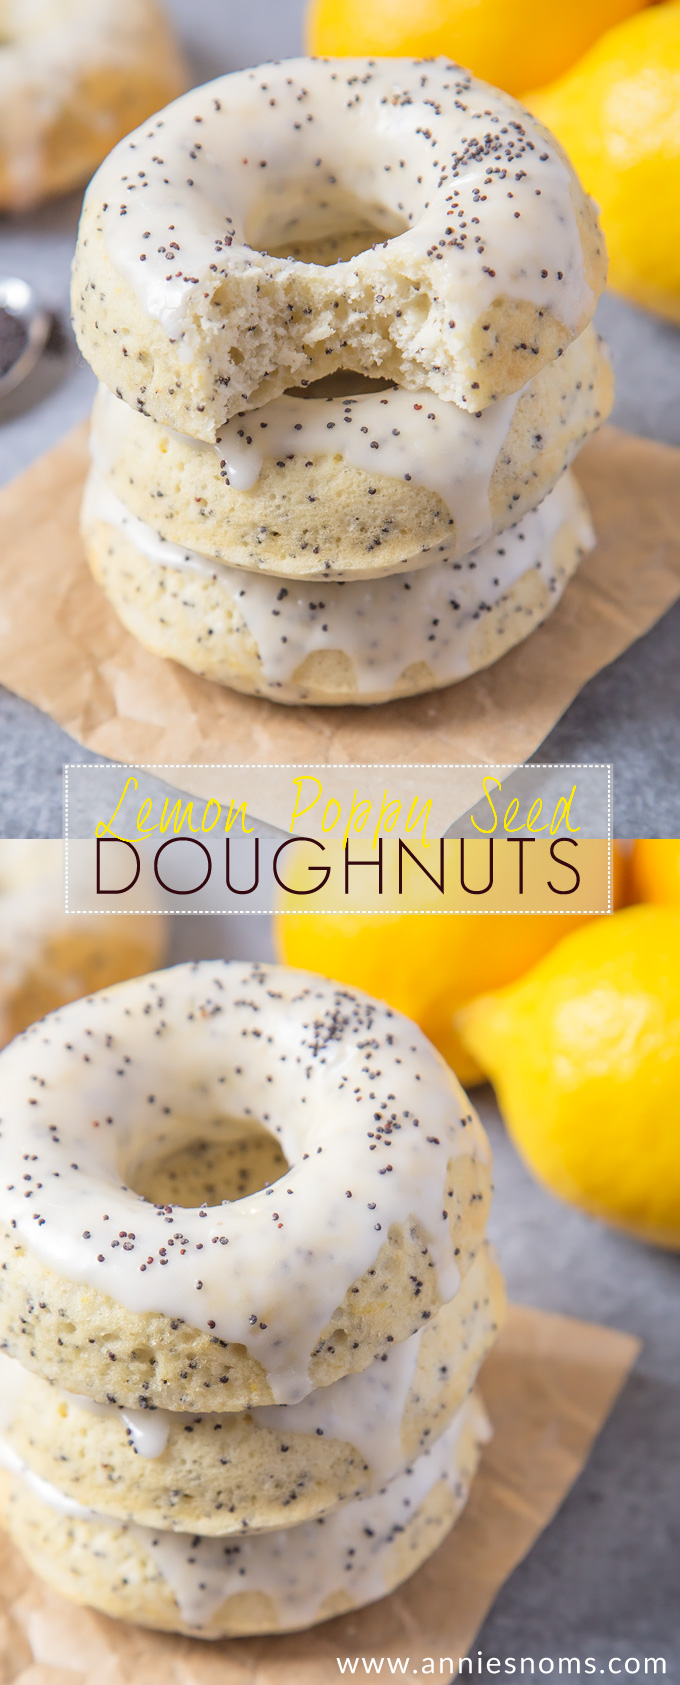 These baked Lemon Poppy Seed Doughnuts are light, crunchy and filled with lemony goodness! An easy, super tasty Spring bake everyone will love!